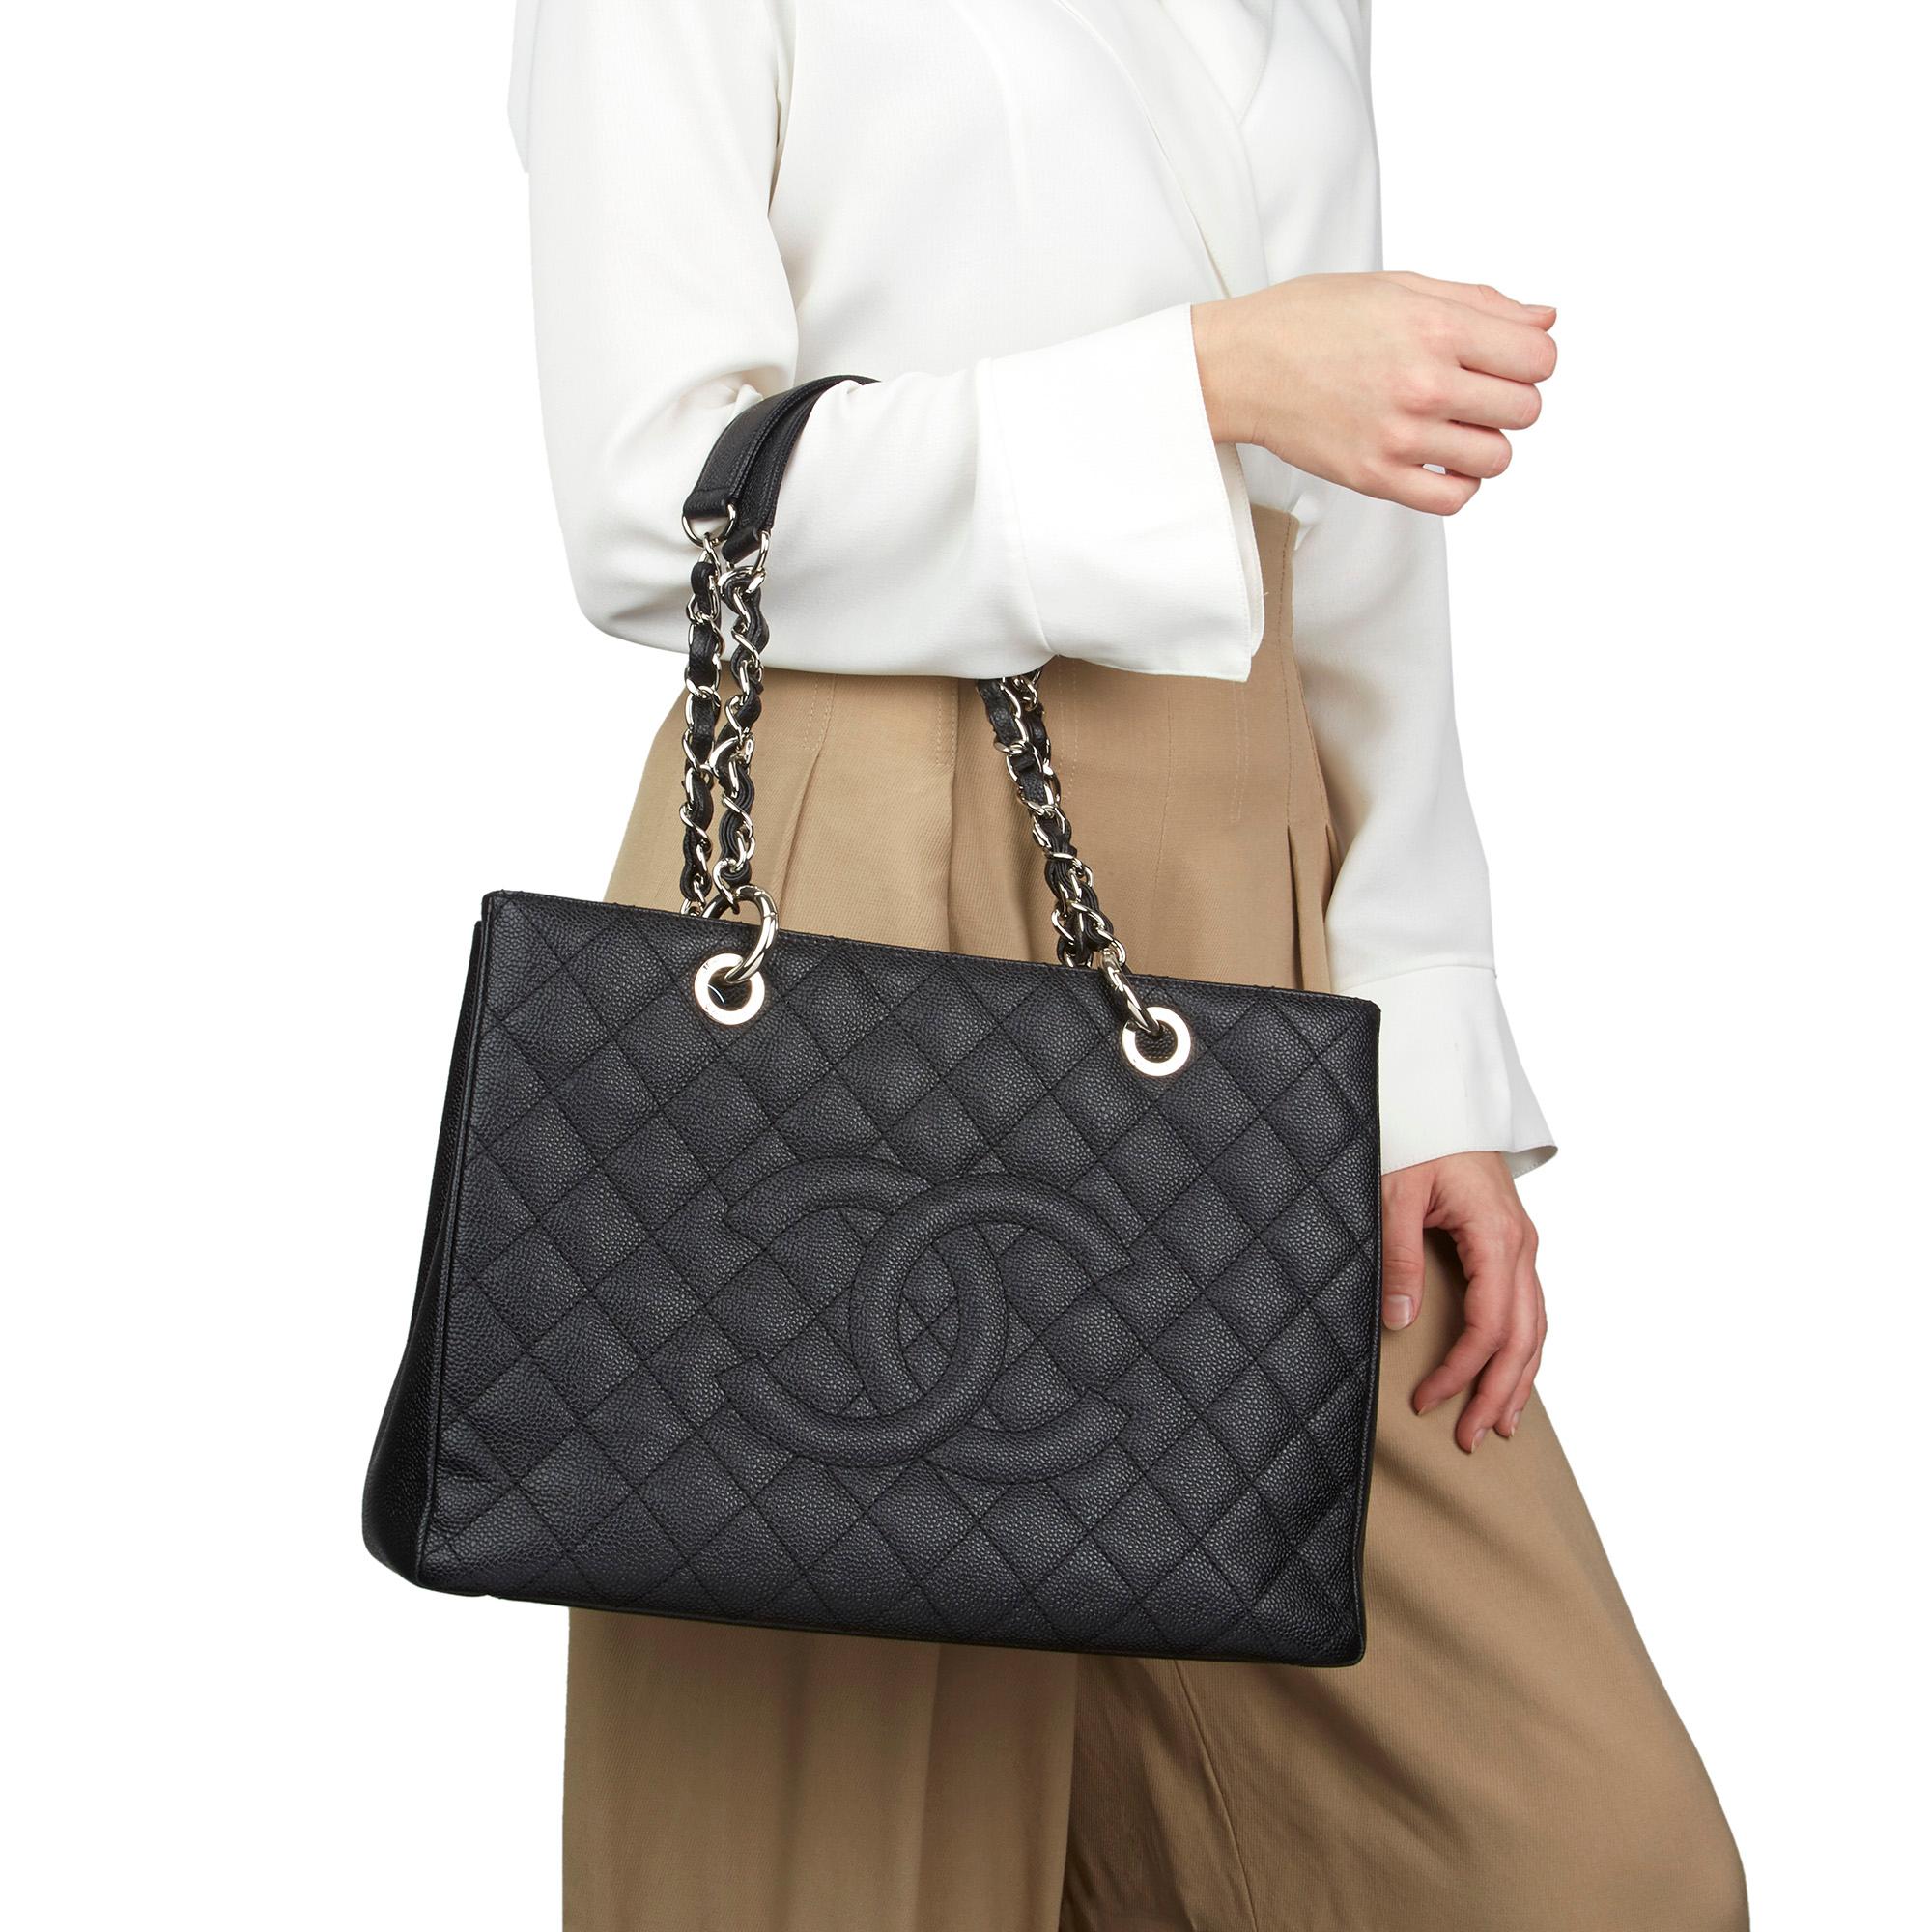 2014 Chanel Black Quilted Caviar Leather Grand Shopping Tote GST 8